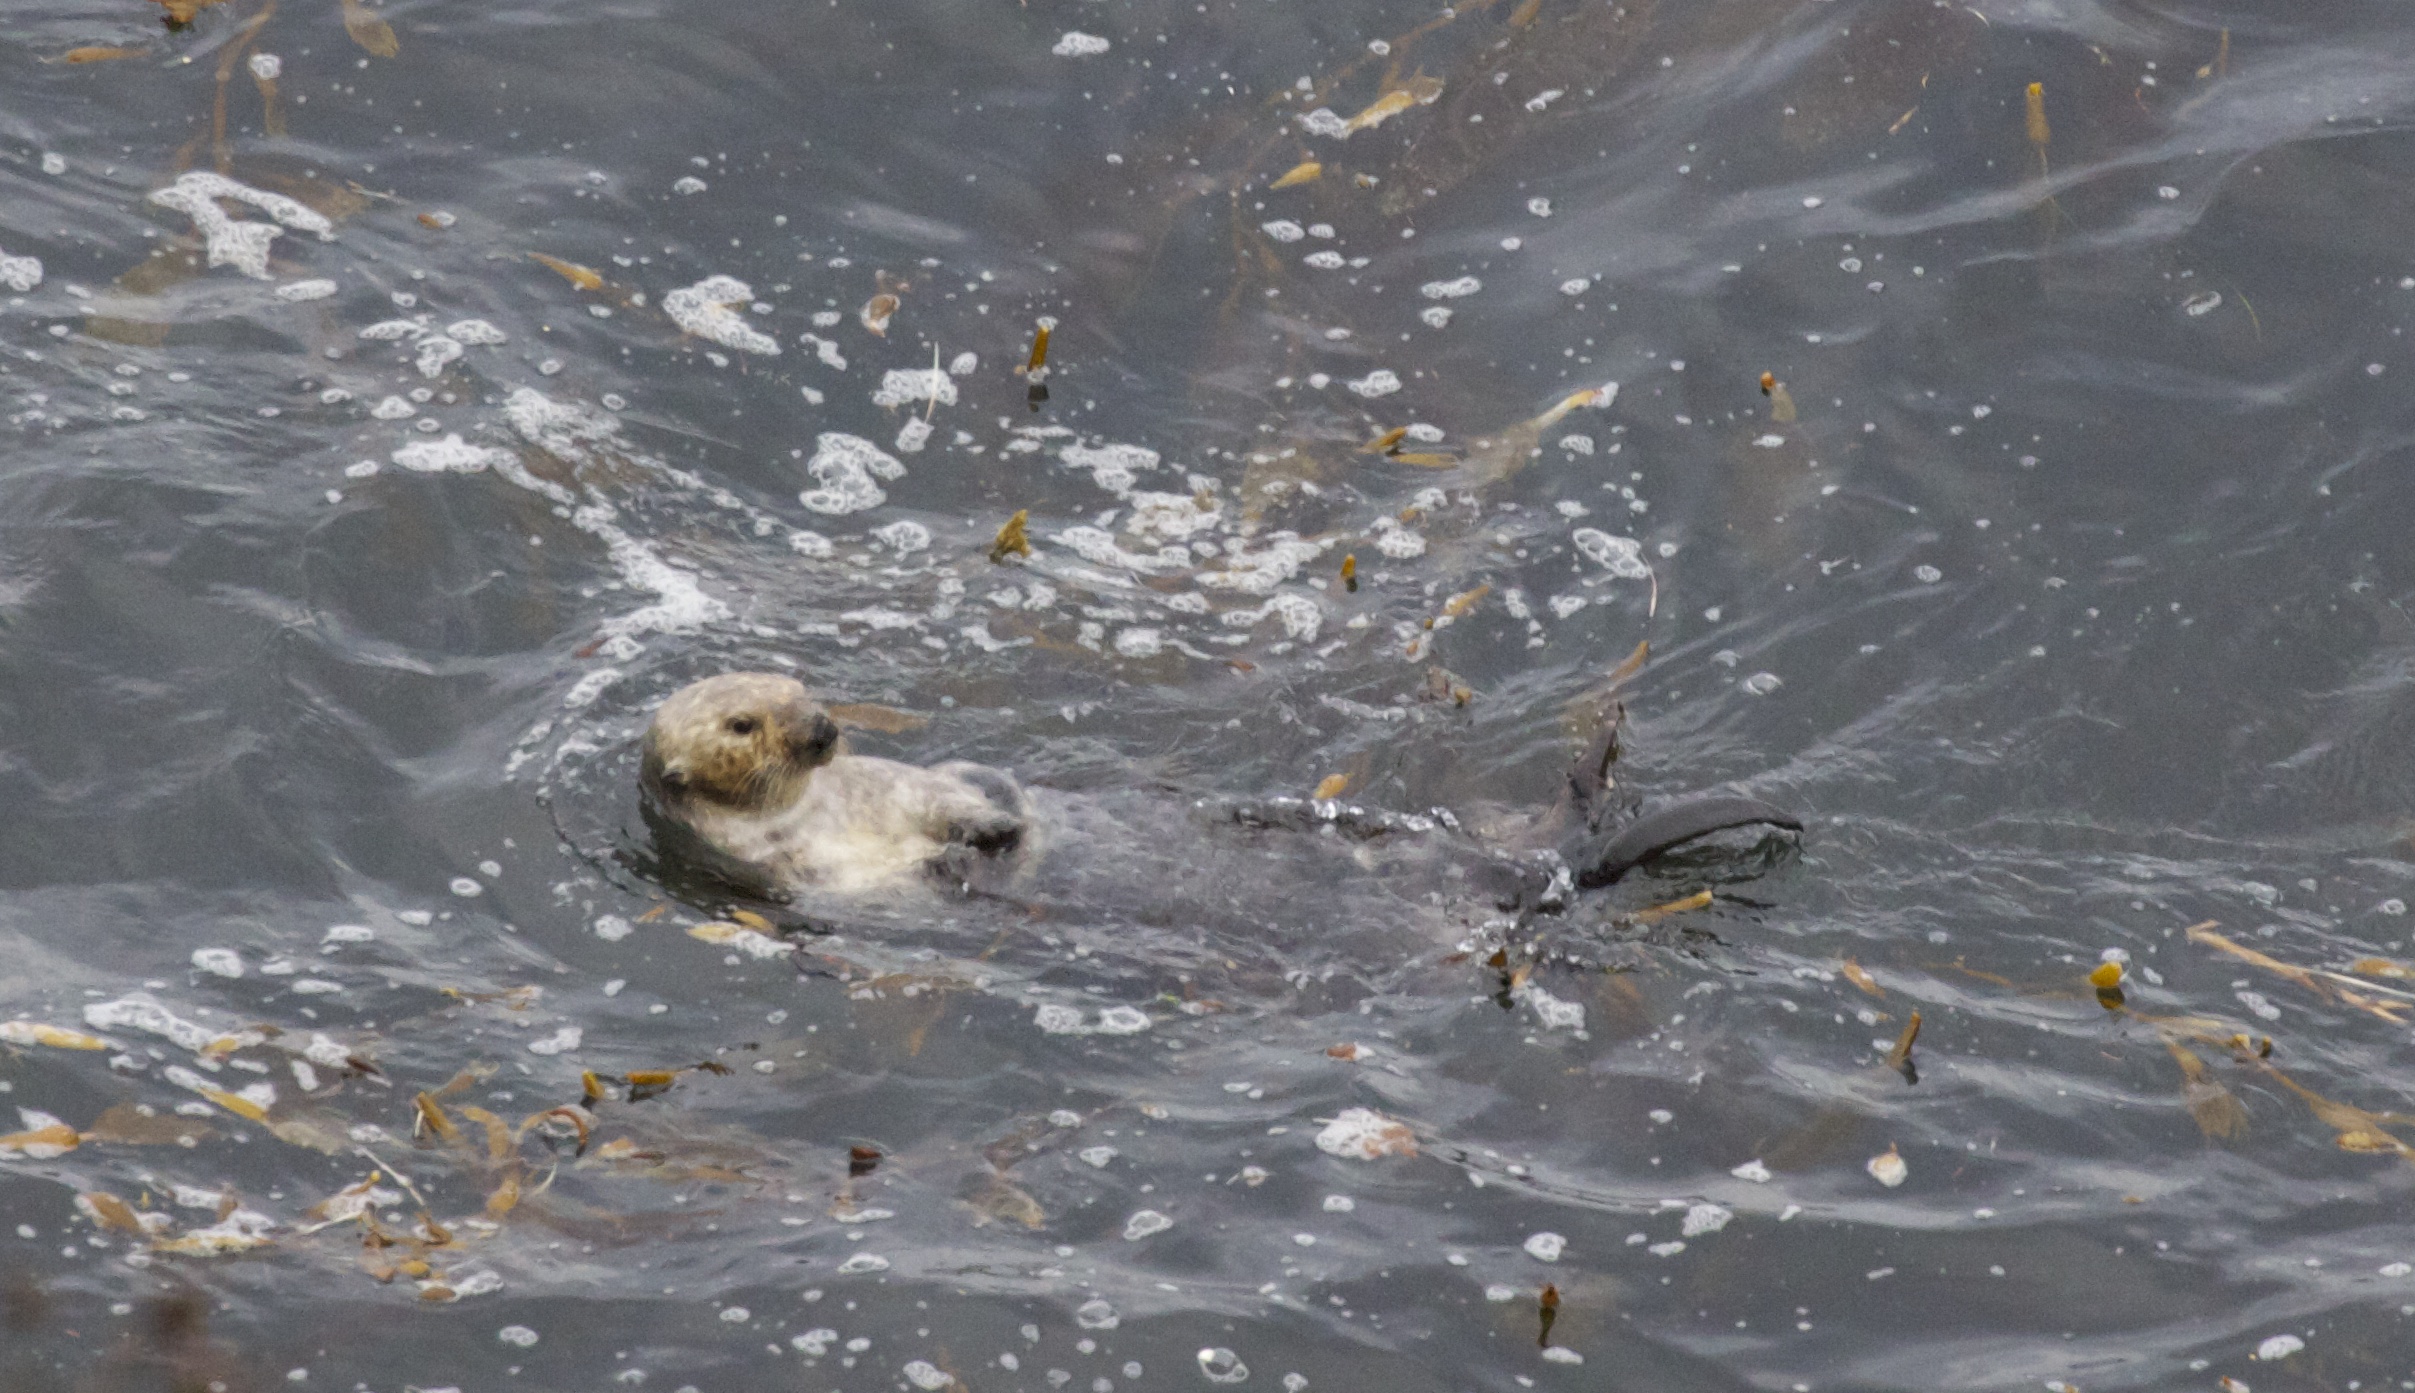 Southern Sea Otter in Point Lobos State Reserve, California